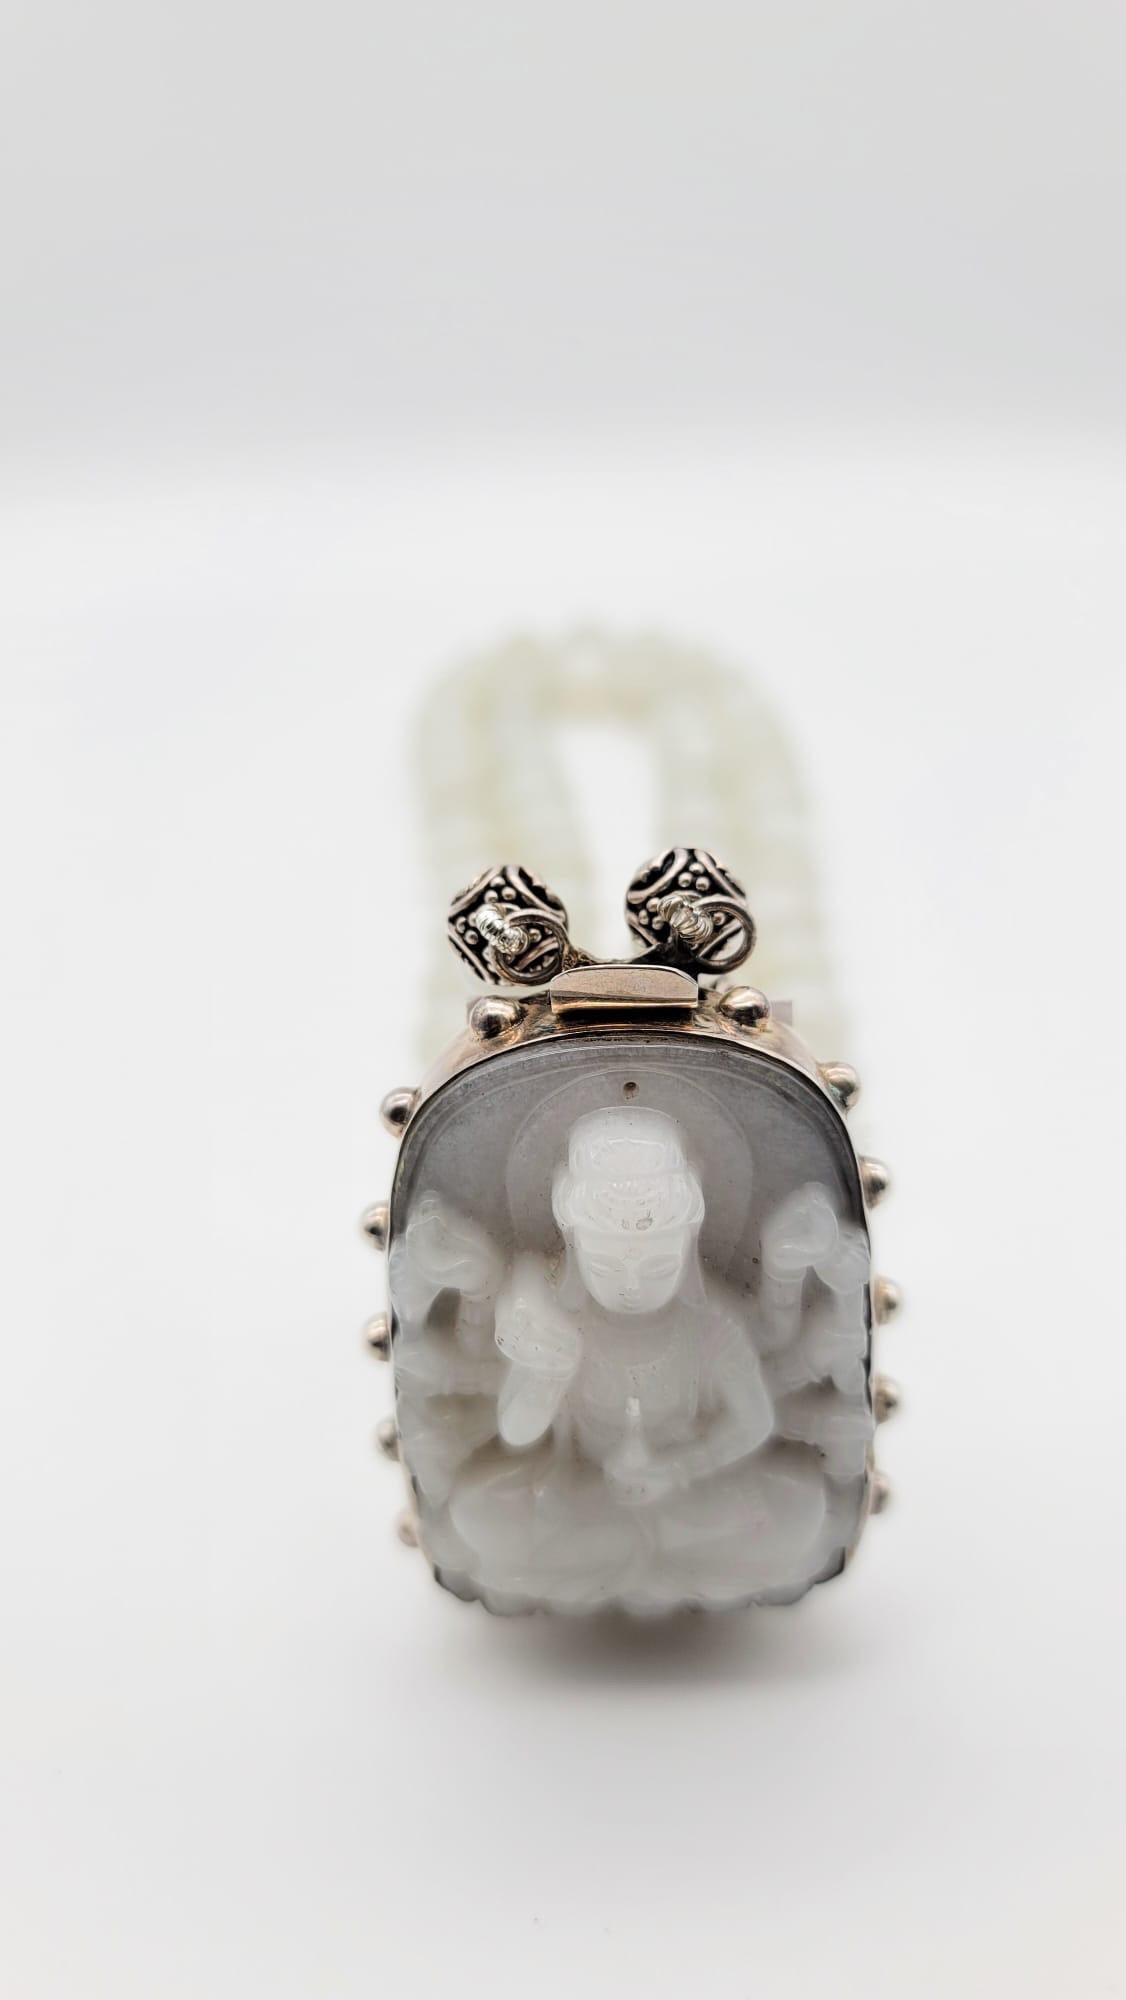 A.Jeschel Carved Guan Yin surrounded by 2 strands of match Moonstone beads 7